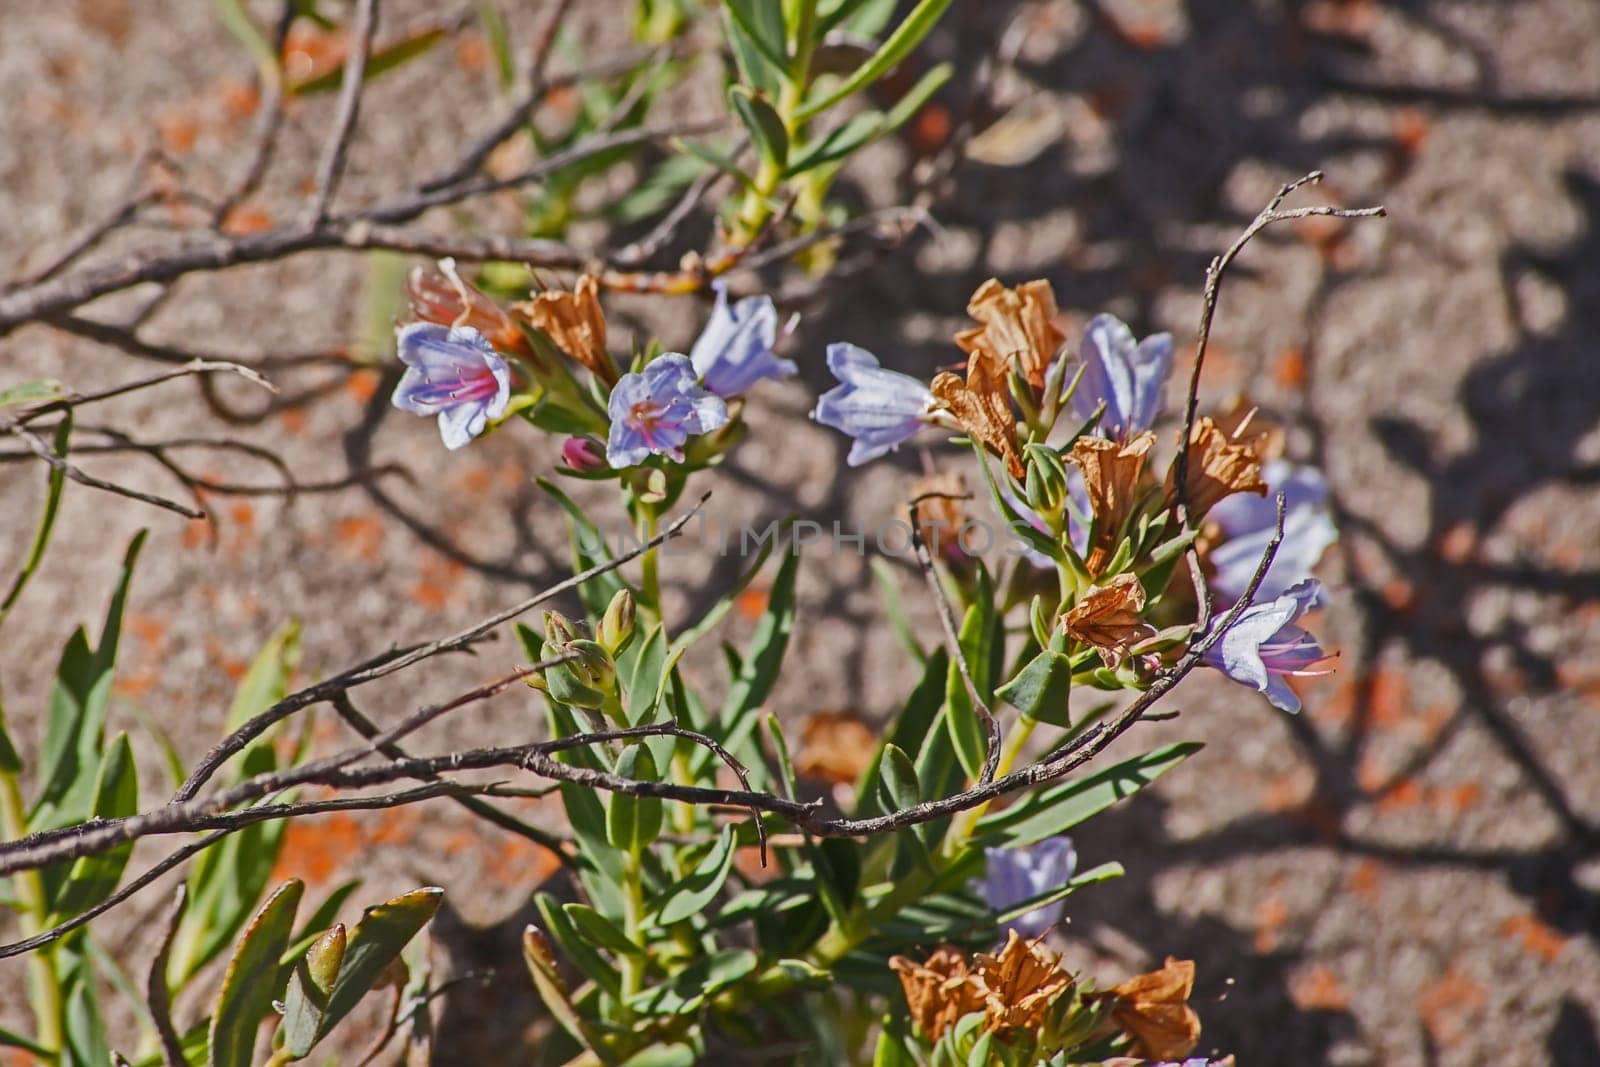 The characteristic pink and blue flowers of the Pyjama Bush (Lobostemon fruticosus). The medicinal qualities of this plant contributes to its other name eight day healing bush